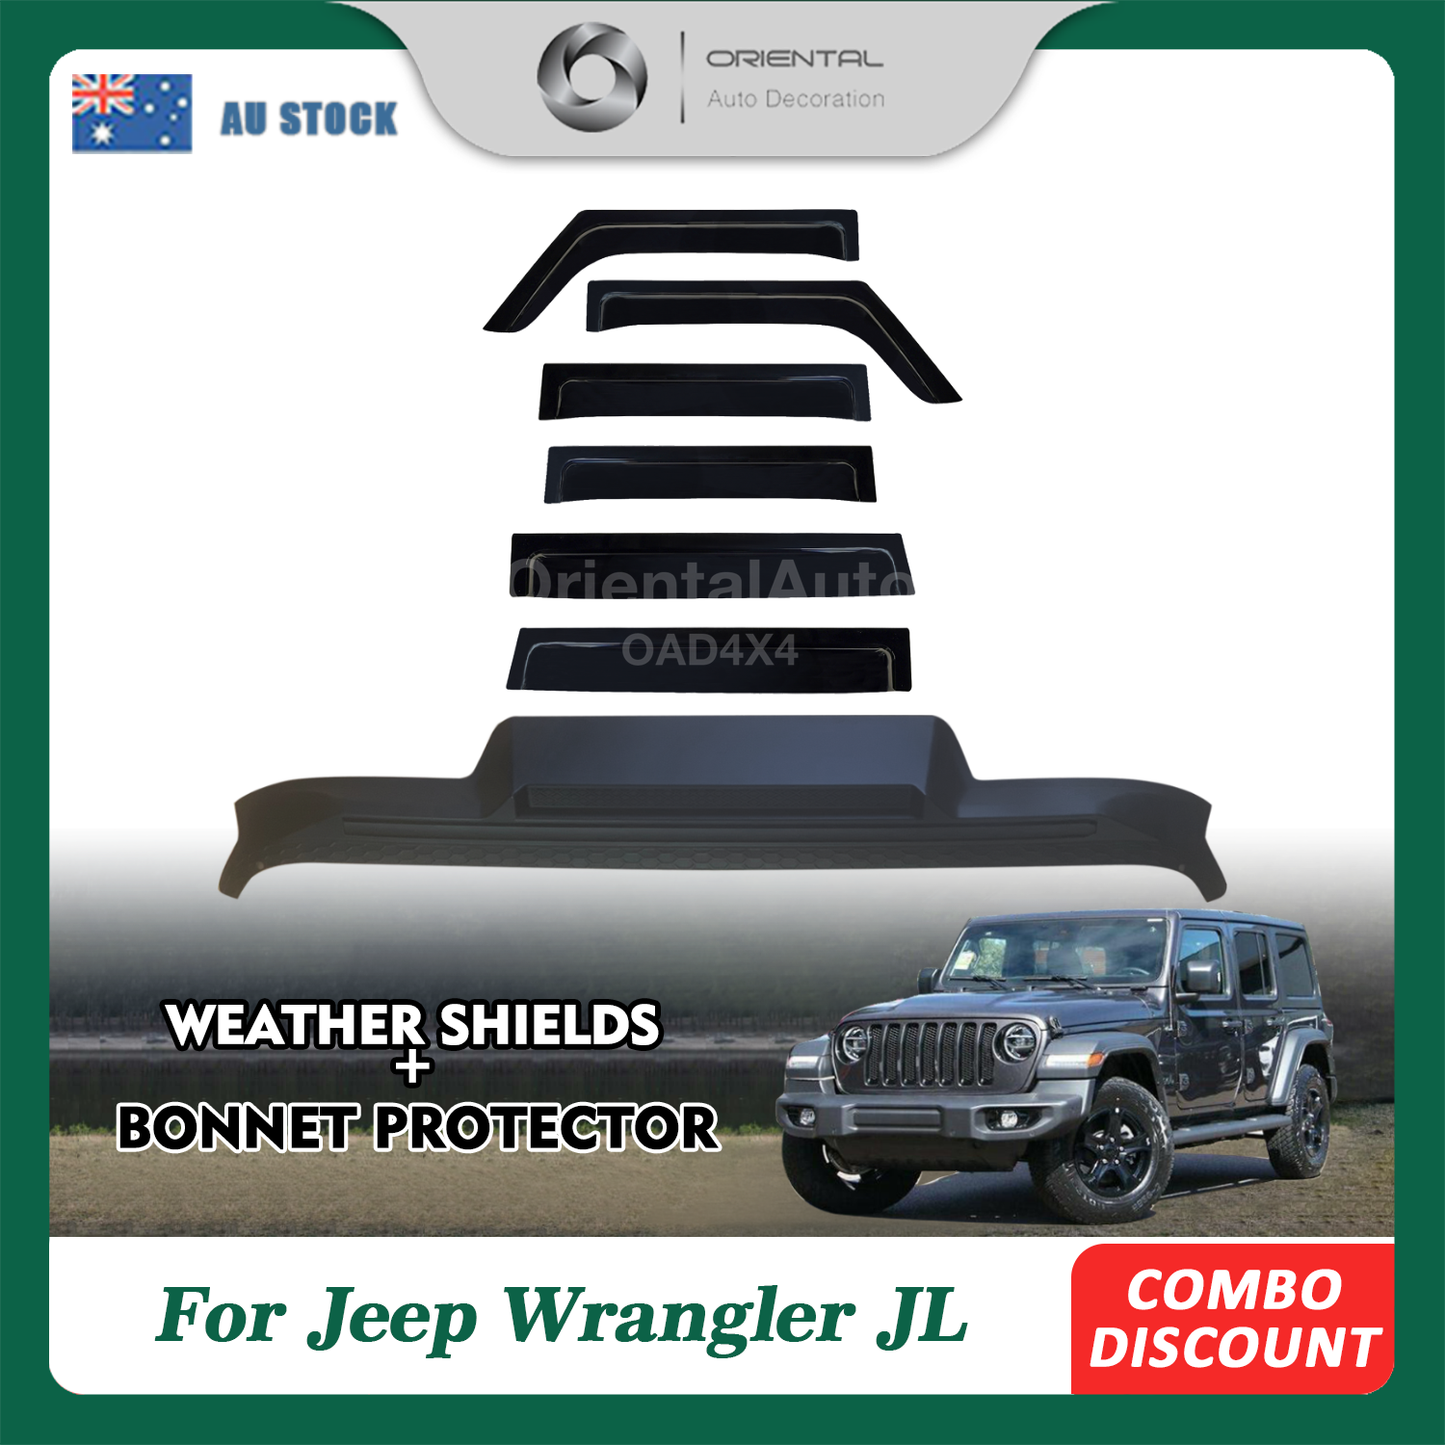 Injection Modeling Bonnet Protector & NEW Luxury Weathershield for Jeep Wrangler JL Series 2018+ 6pcs Weather Shields Window Visor + Hood Protector Bonnet Guard